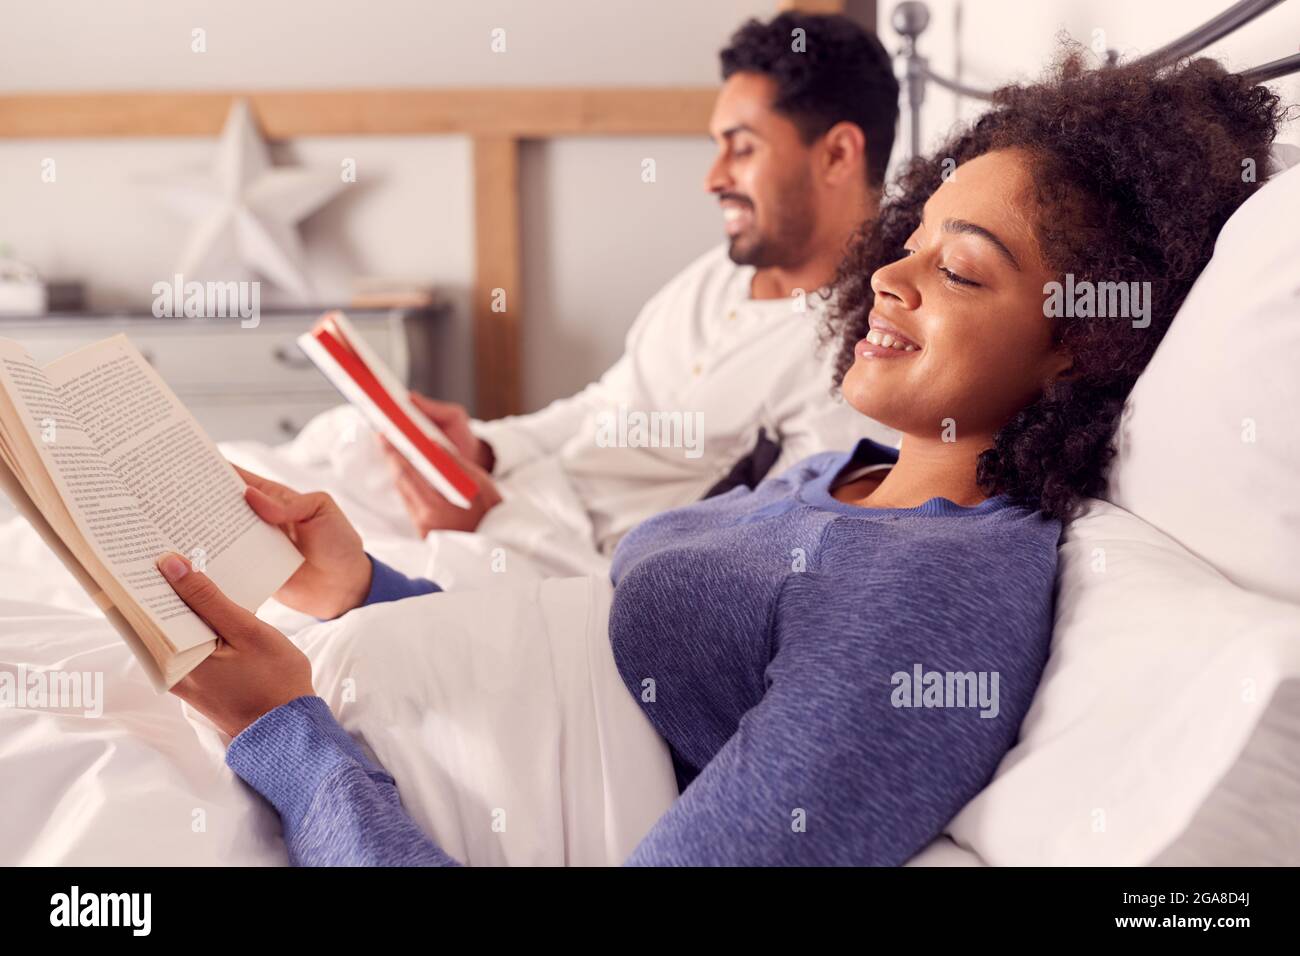 Couple In Wearing Pyjamas Lying In Bed Reading Books Together Stock Photo